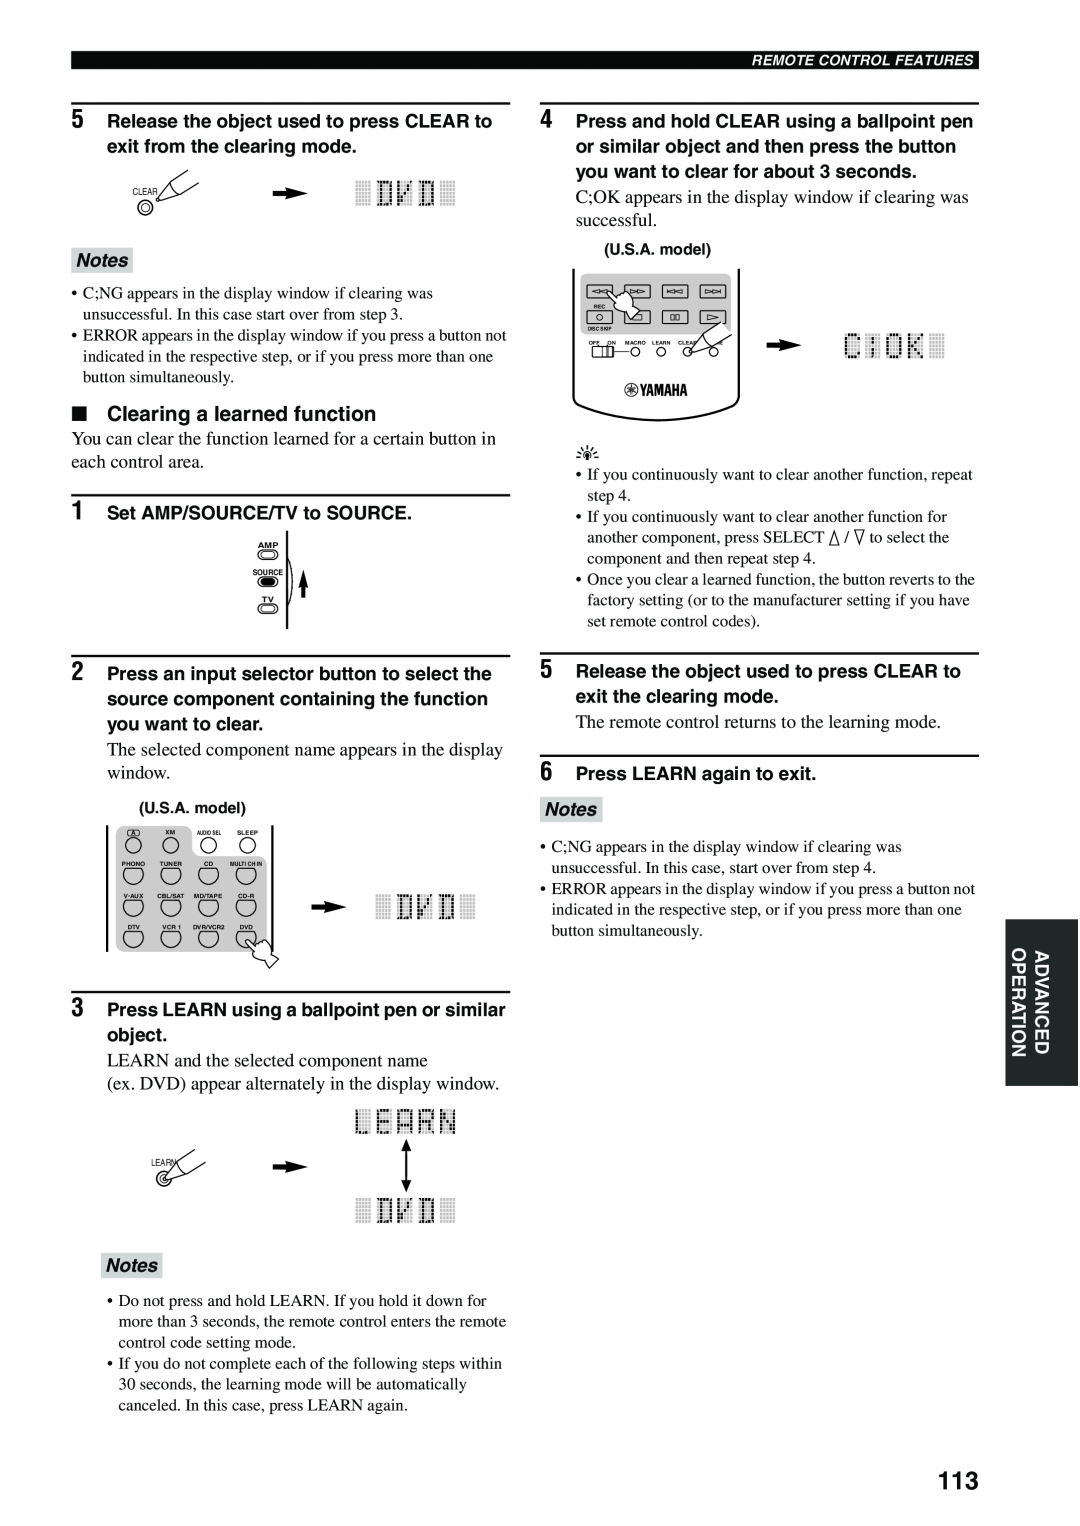 Yamaha X-V2600 owner manual Clearing a learned function, Notes 